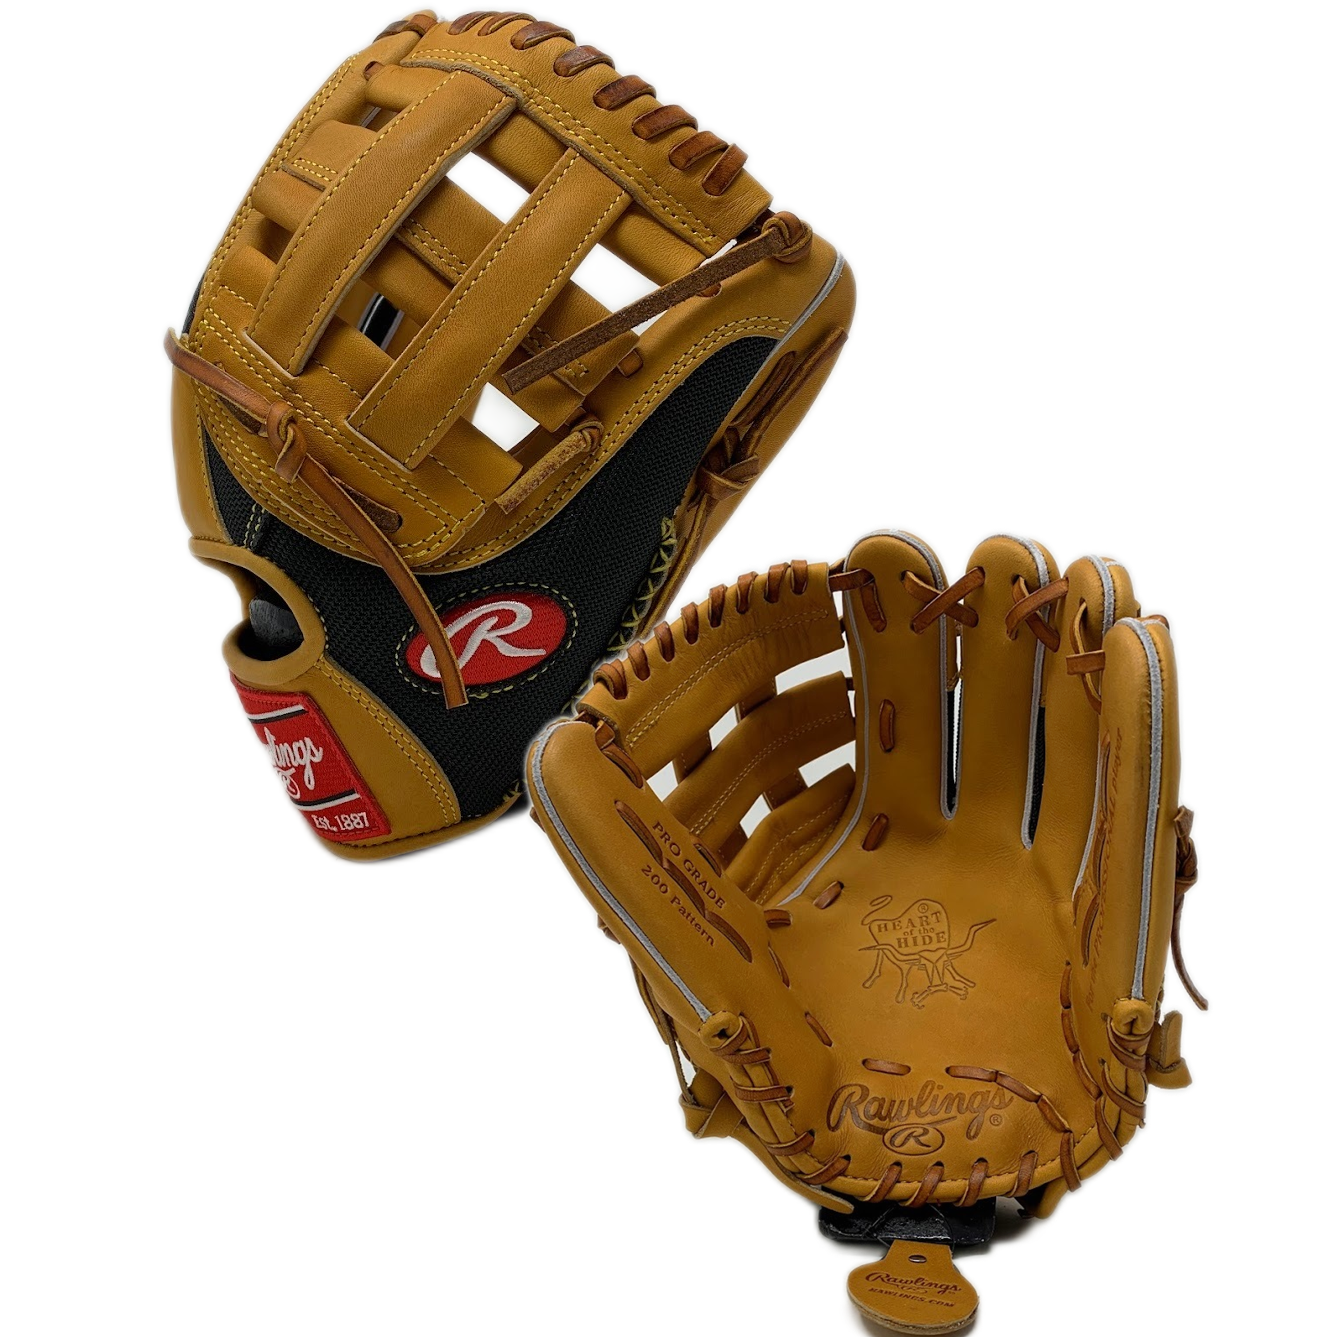 rawlings-heart-of-the-hide-11-5-inch-baseball-glove-200-deco-mesh-pro-h-web-right-hand-throw PRO204-6TDM-RightHandThrow Rawlings    Constructed from Rawlings world-renowned Tan Heart of the Hide steer